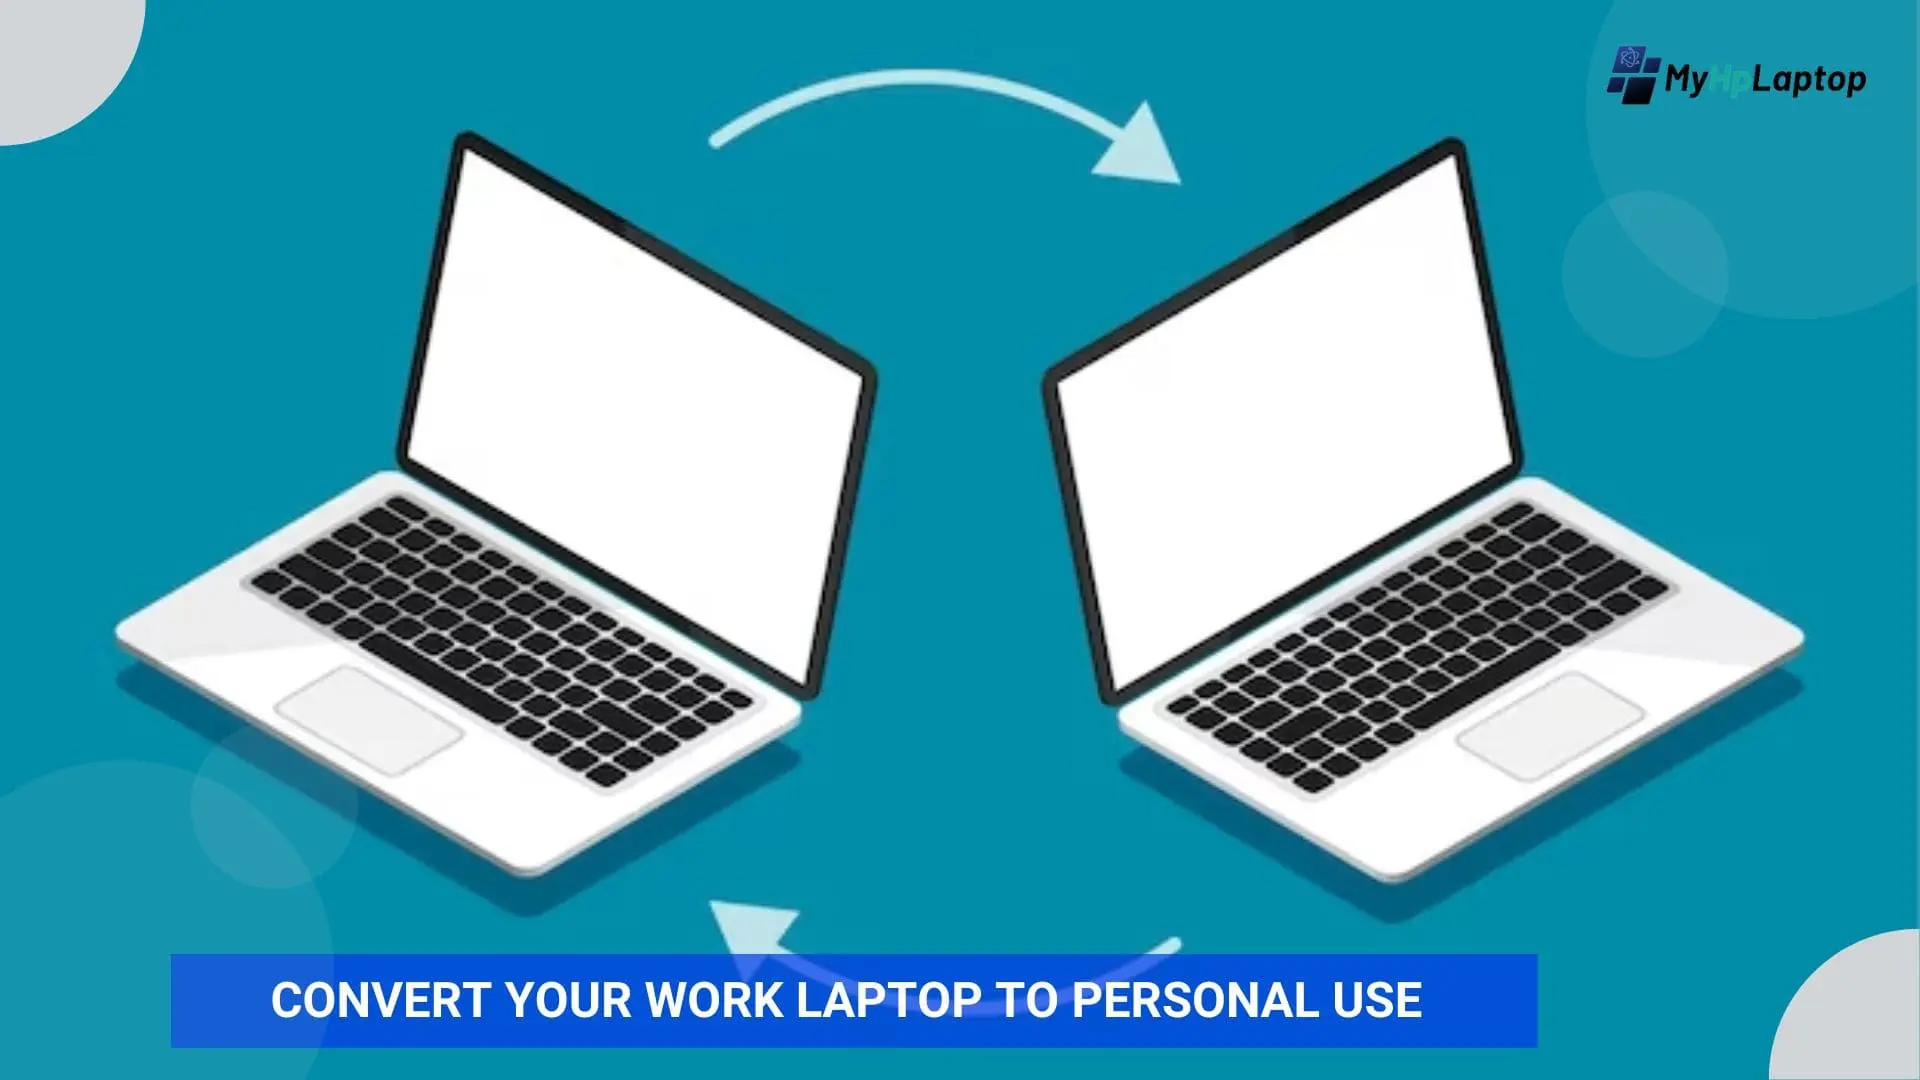 Convert Your Work Laptop to Personal Use